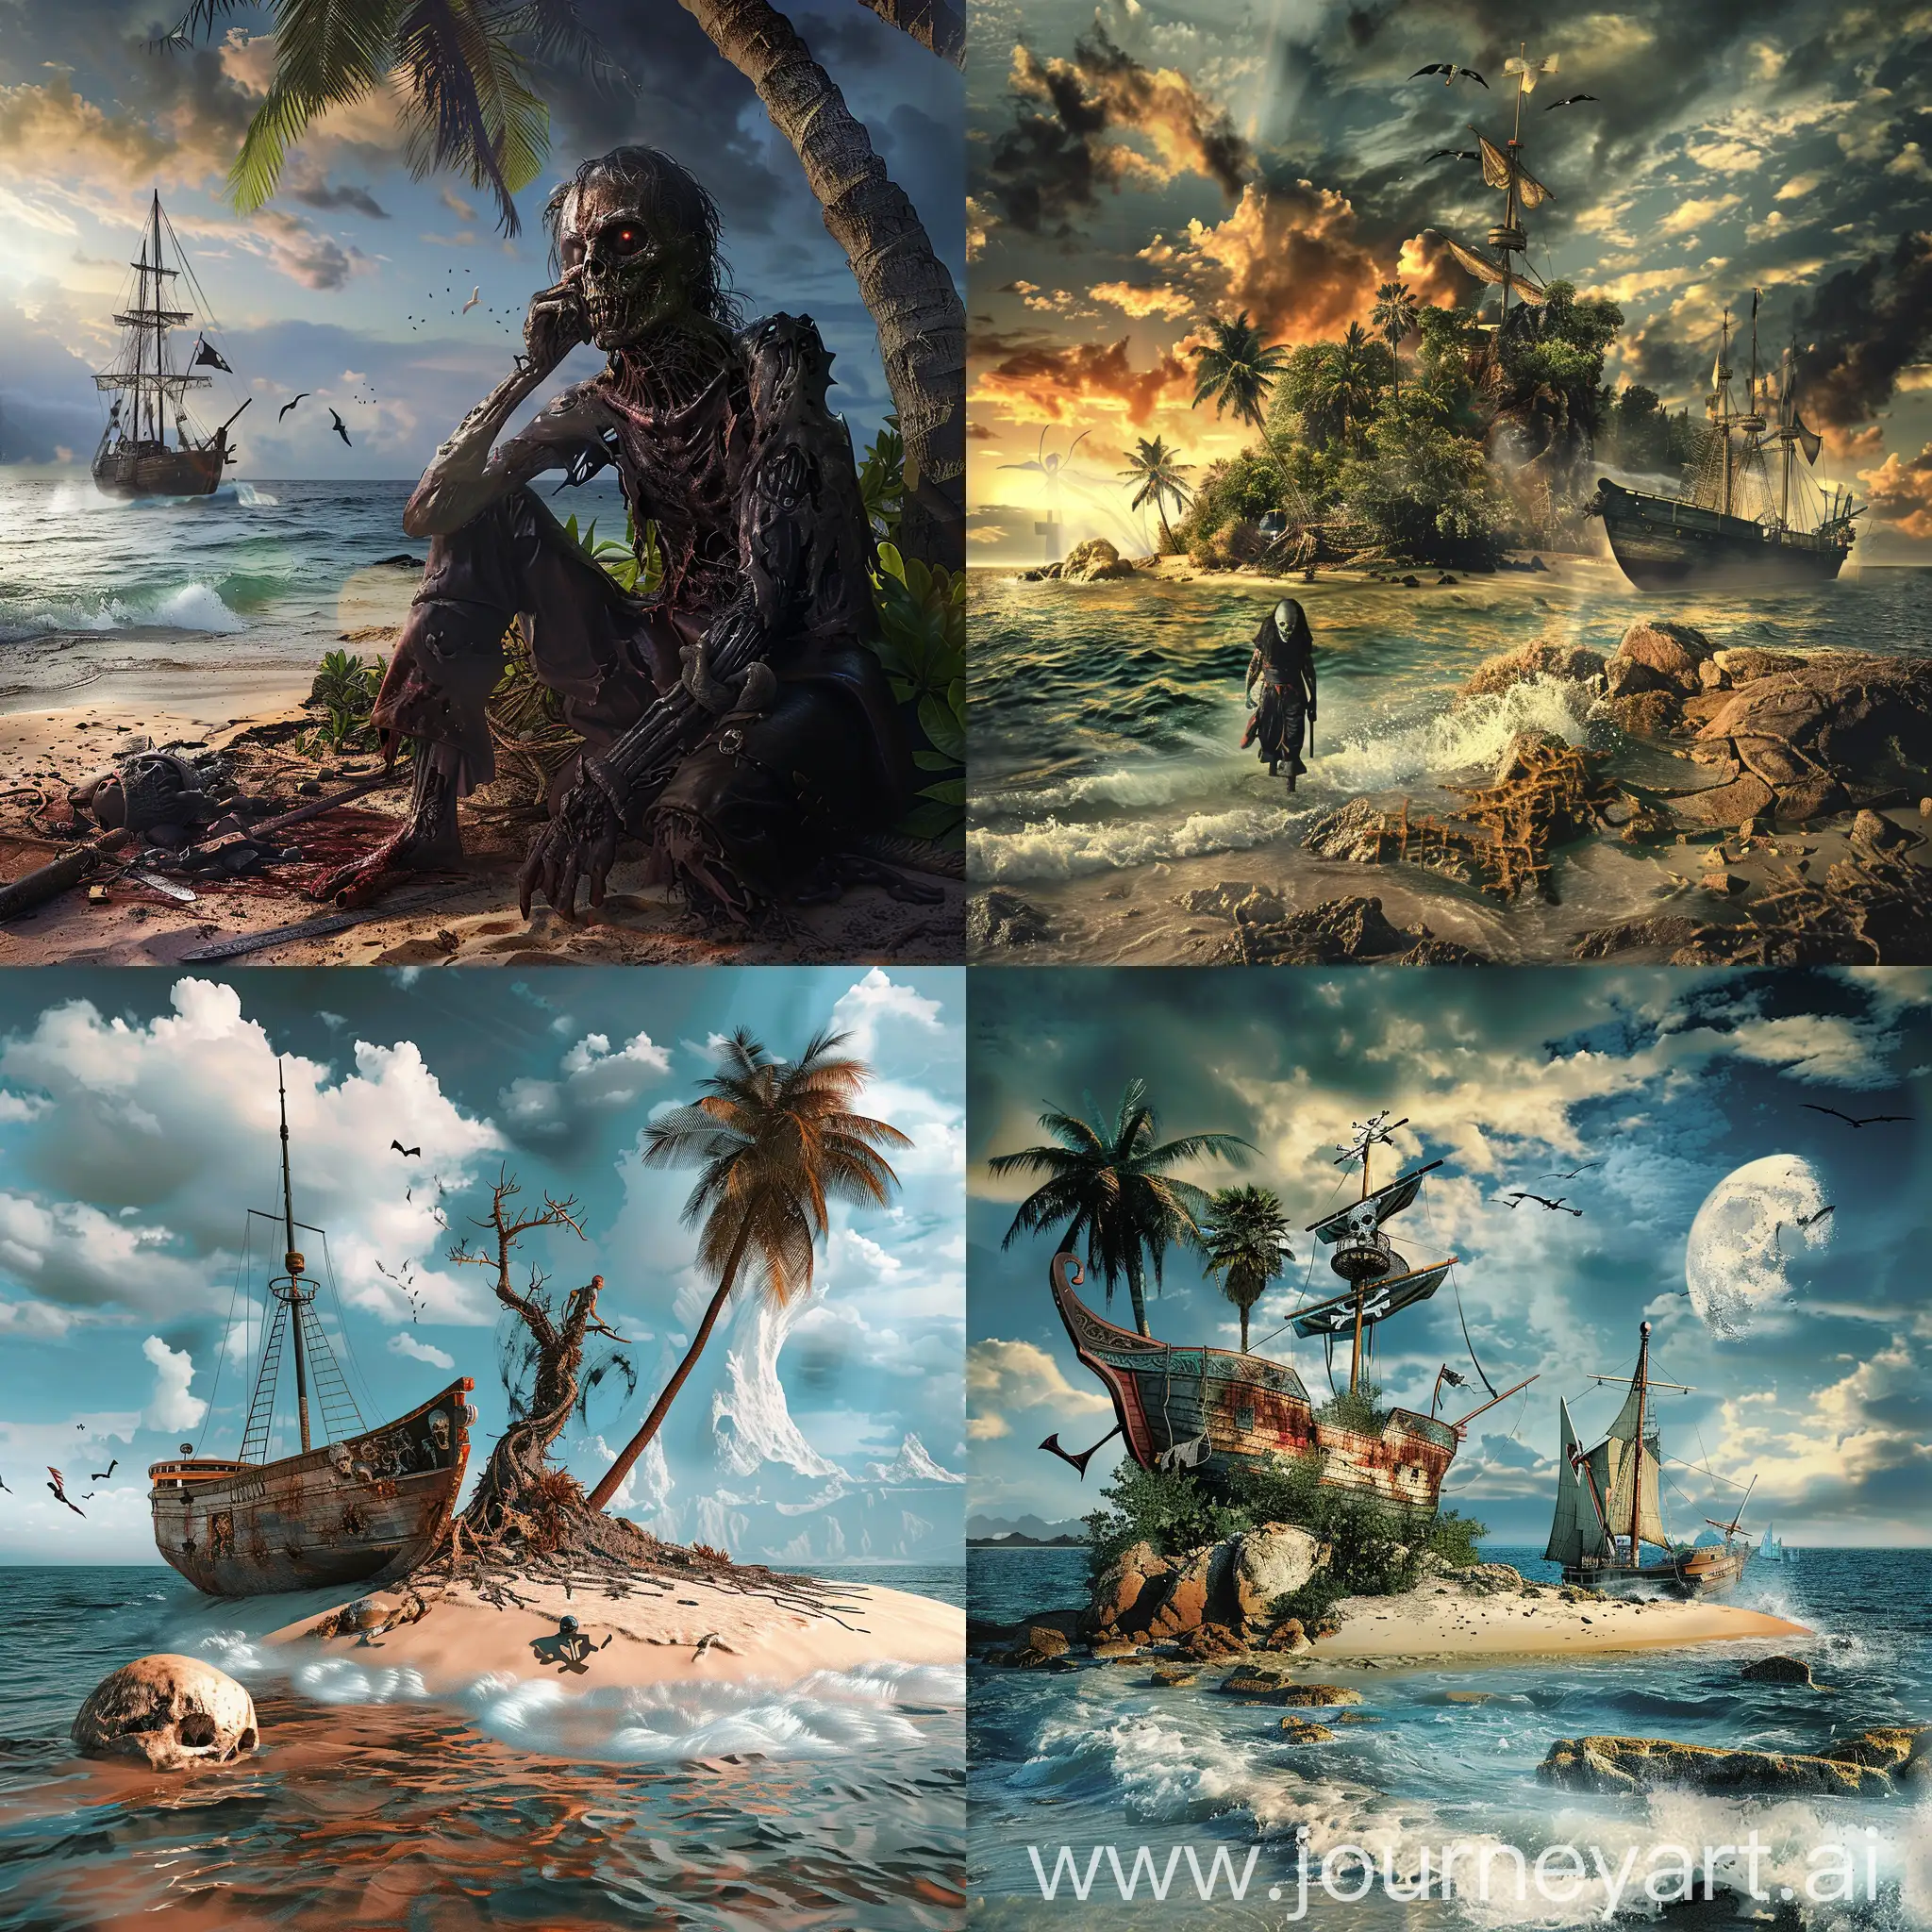 Zombie-Killer-Survivor-on-Deserted-Island-with-Pirate-Boat